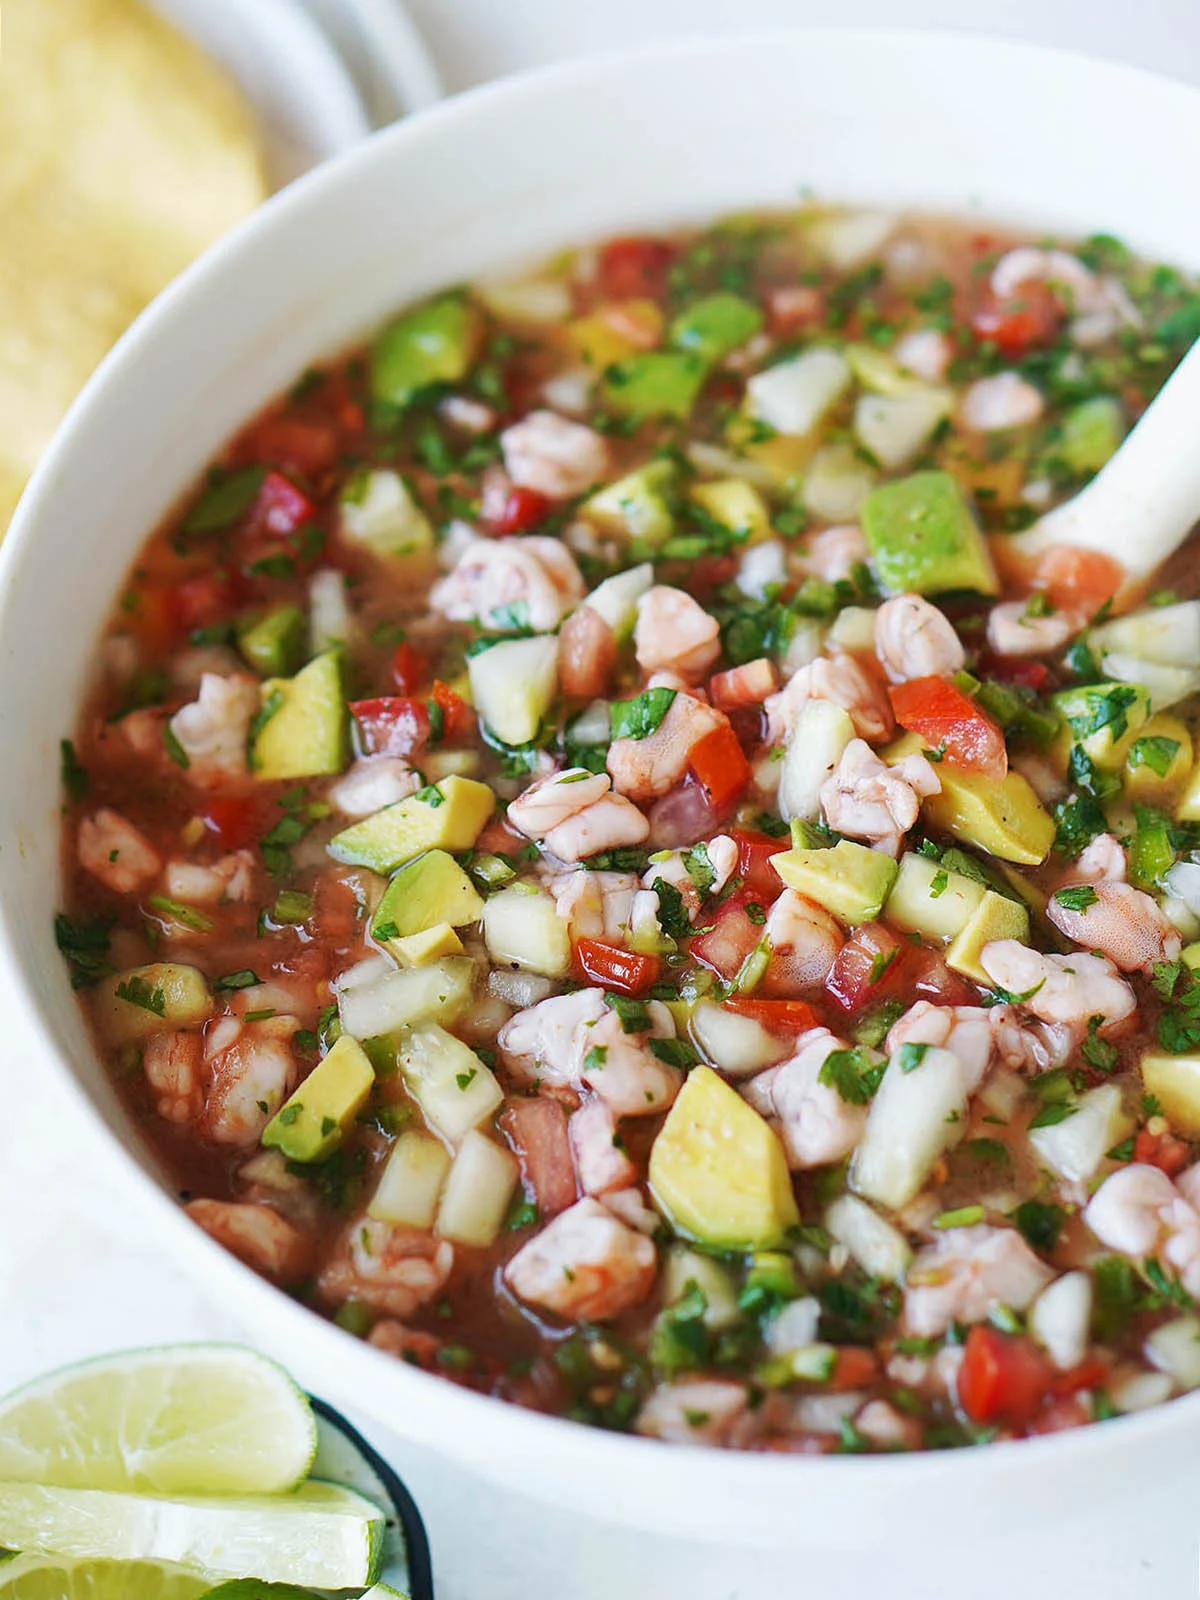 Best Way to Make Ceviche